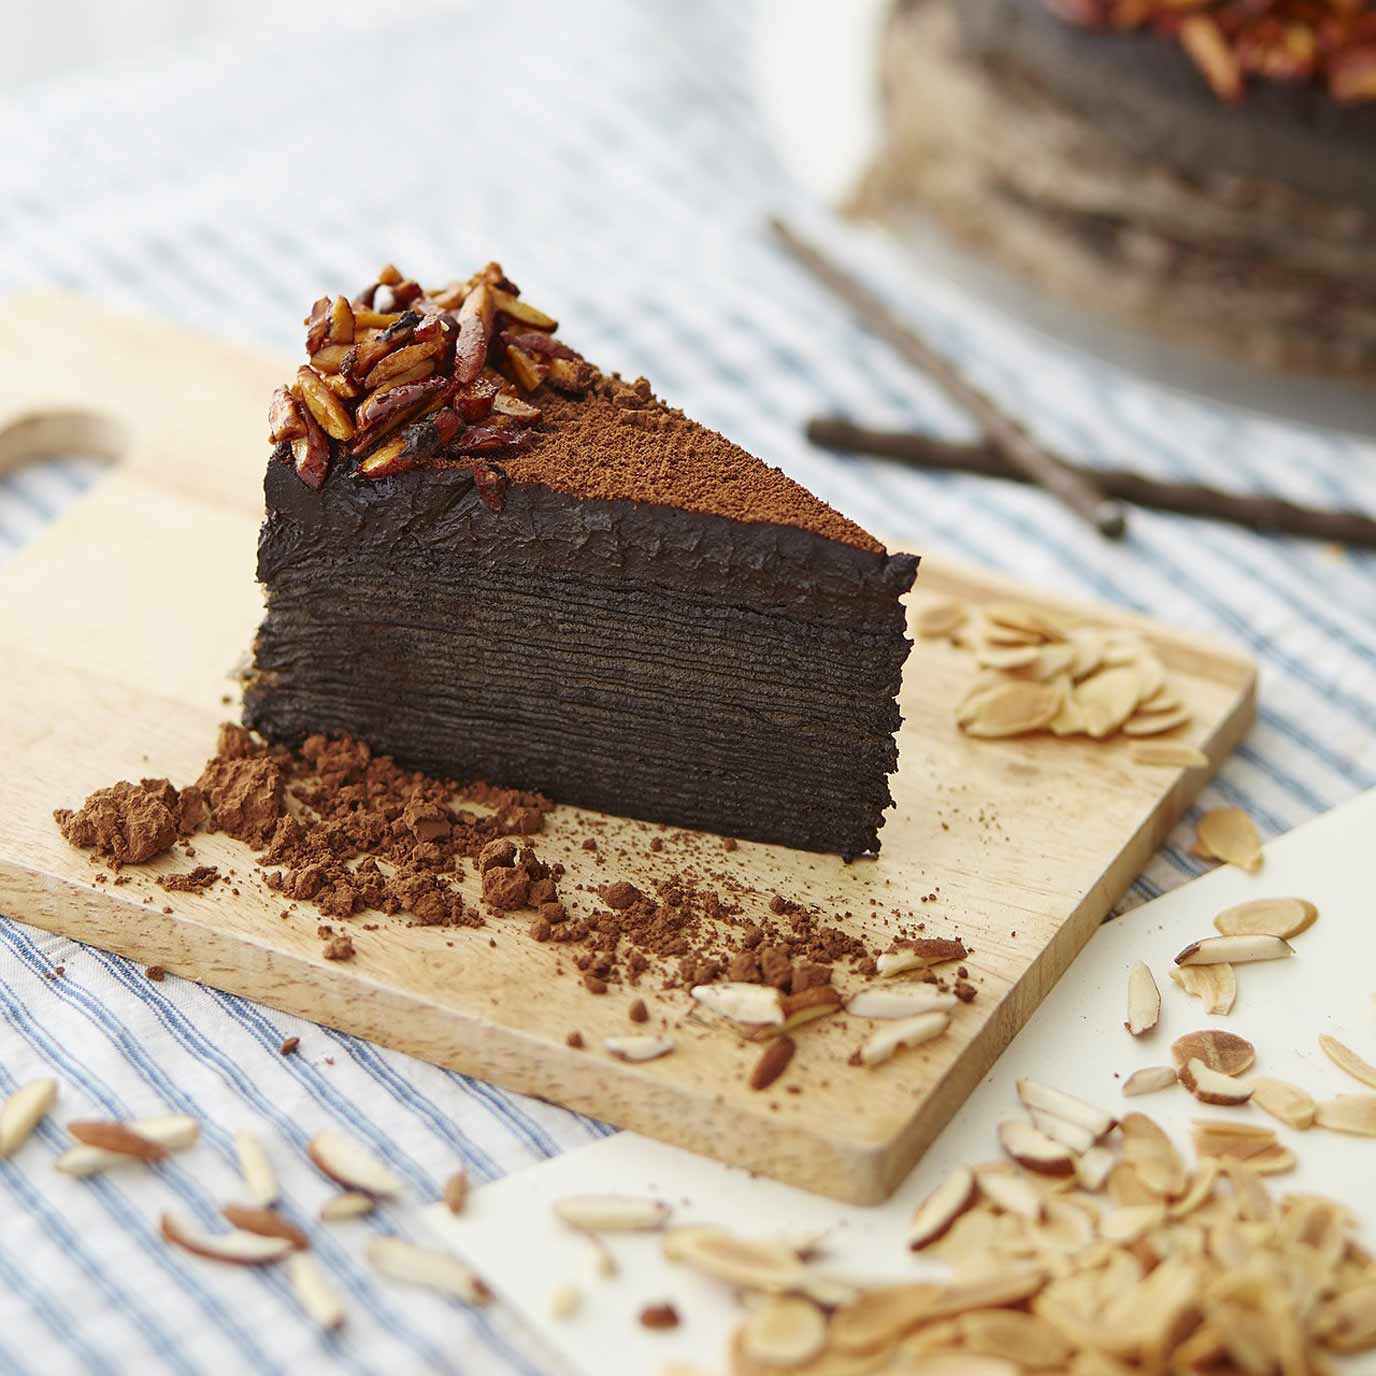 Read about the benefits of cacao, plus Easter cake's mood-boosting properties